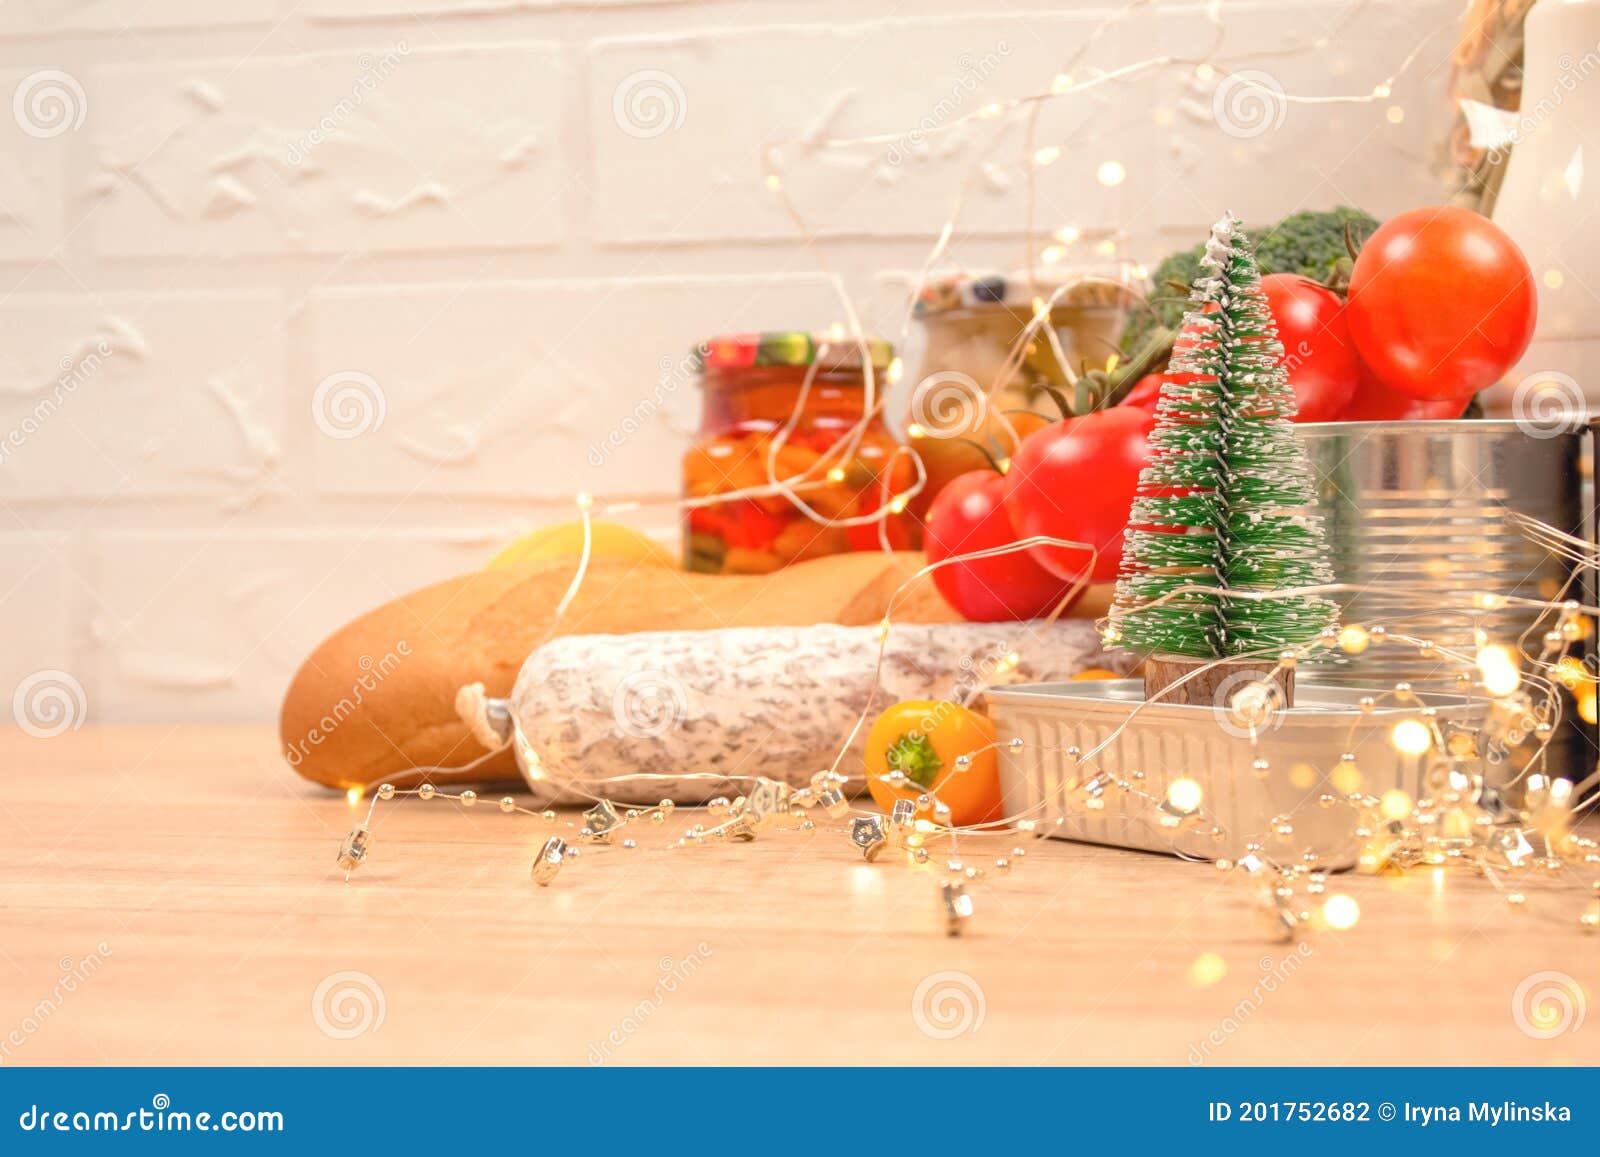 Christmas Donations - Food Donations on Light Background with ...